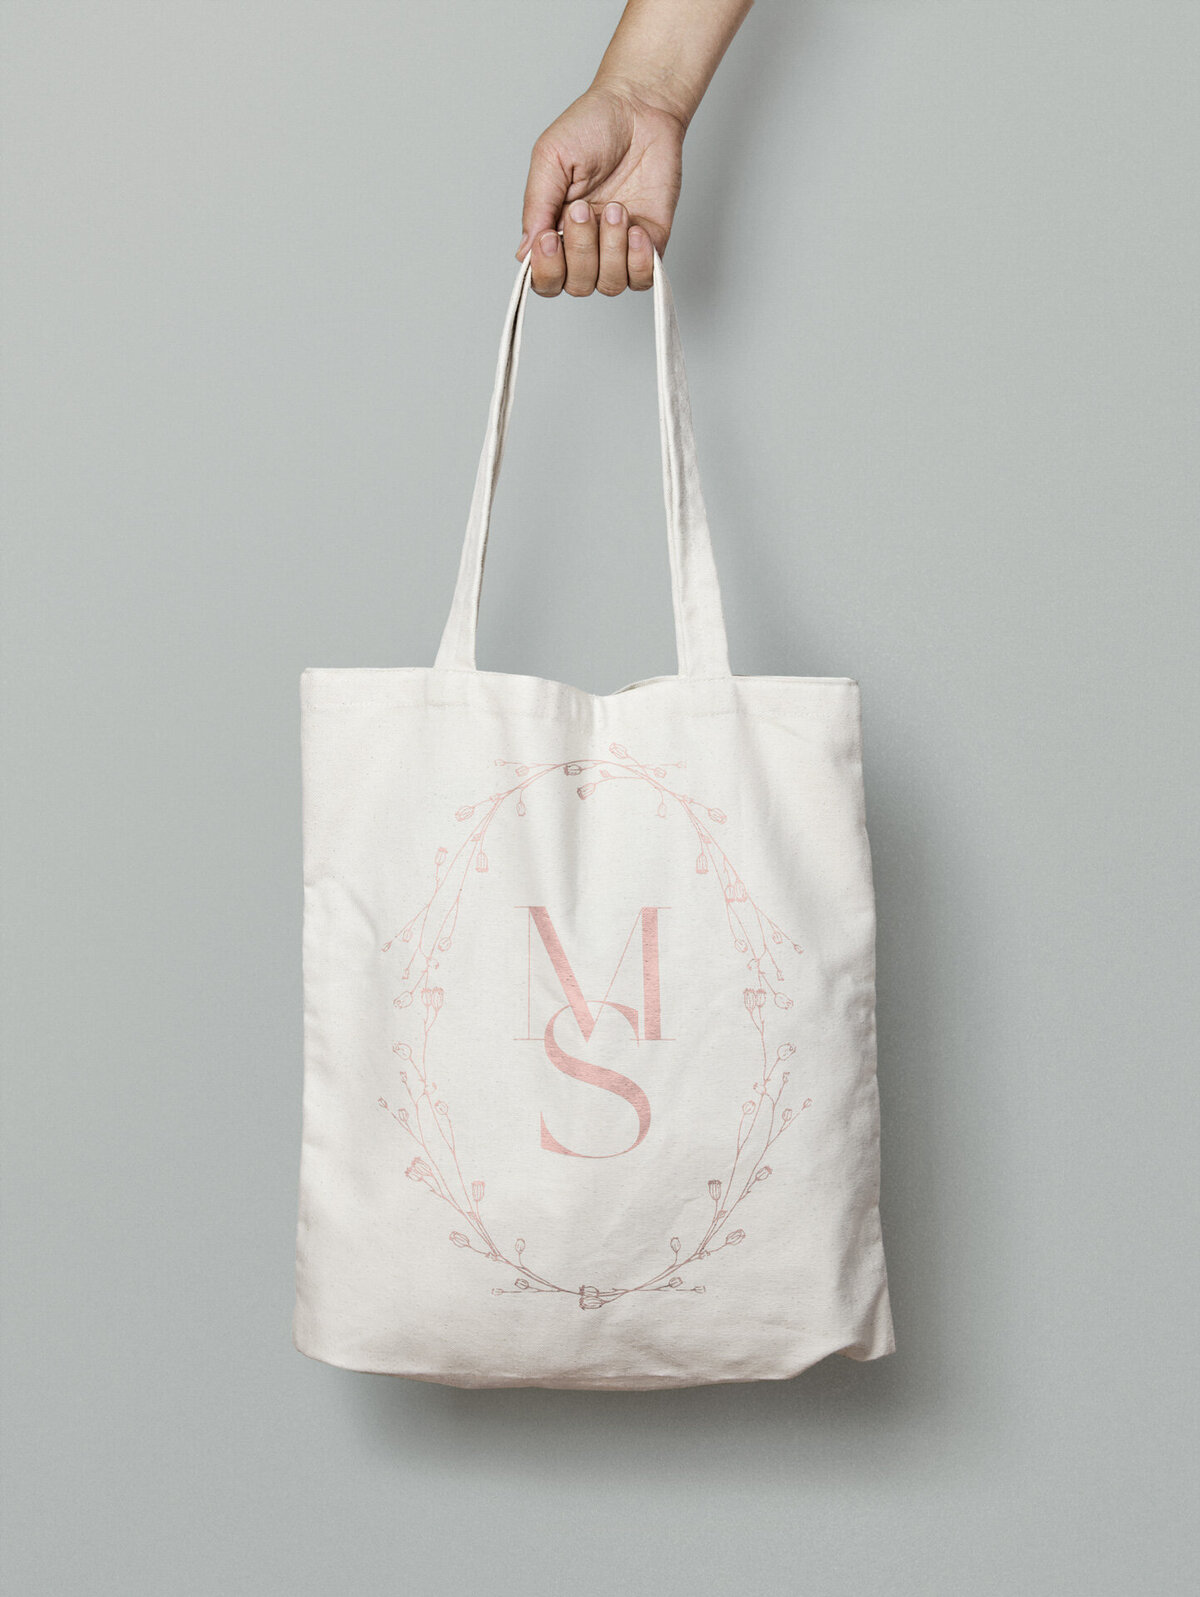 a mockup showing. a pink stamp logo on a tote bag